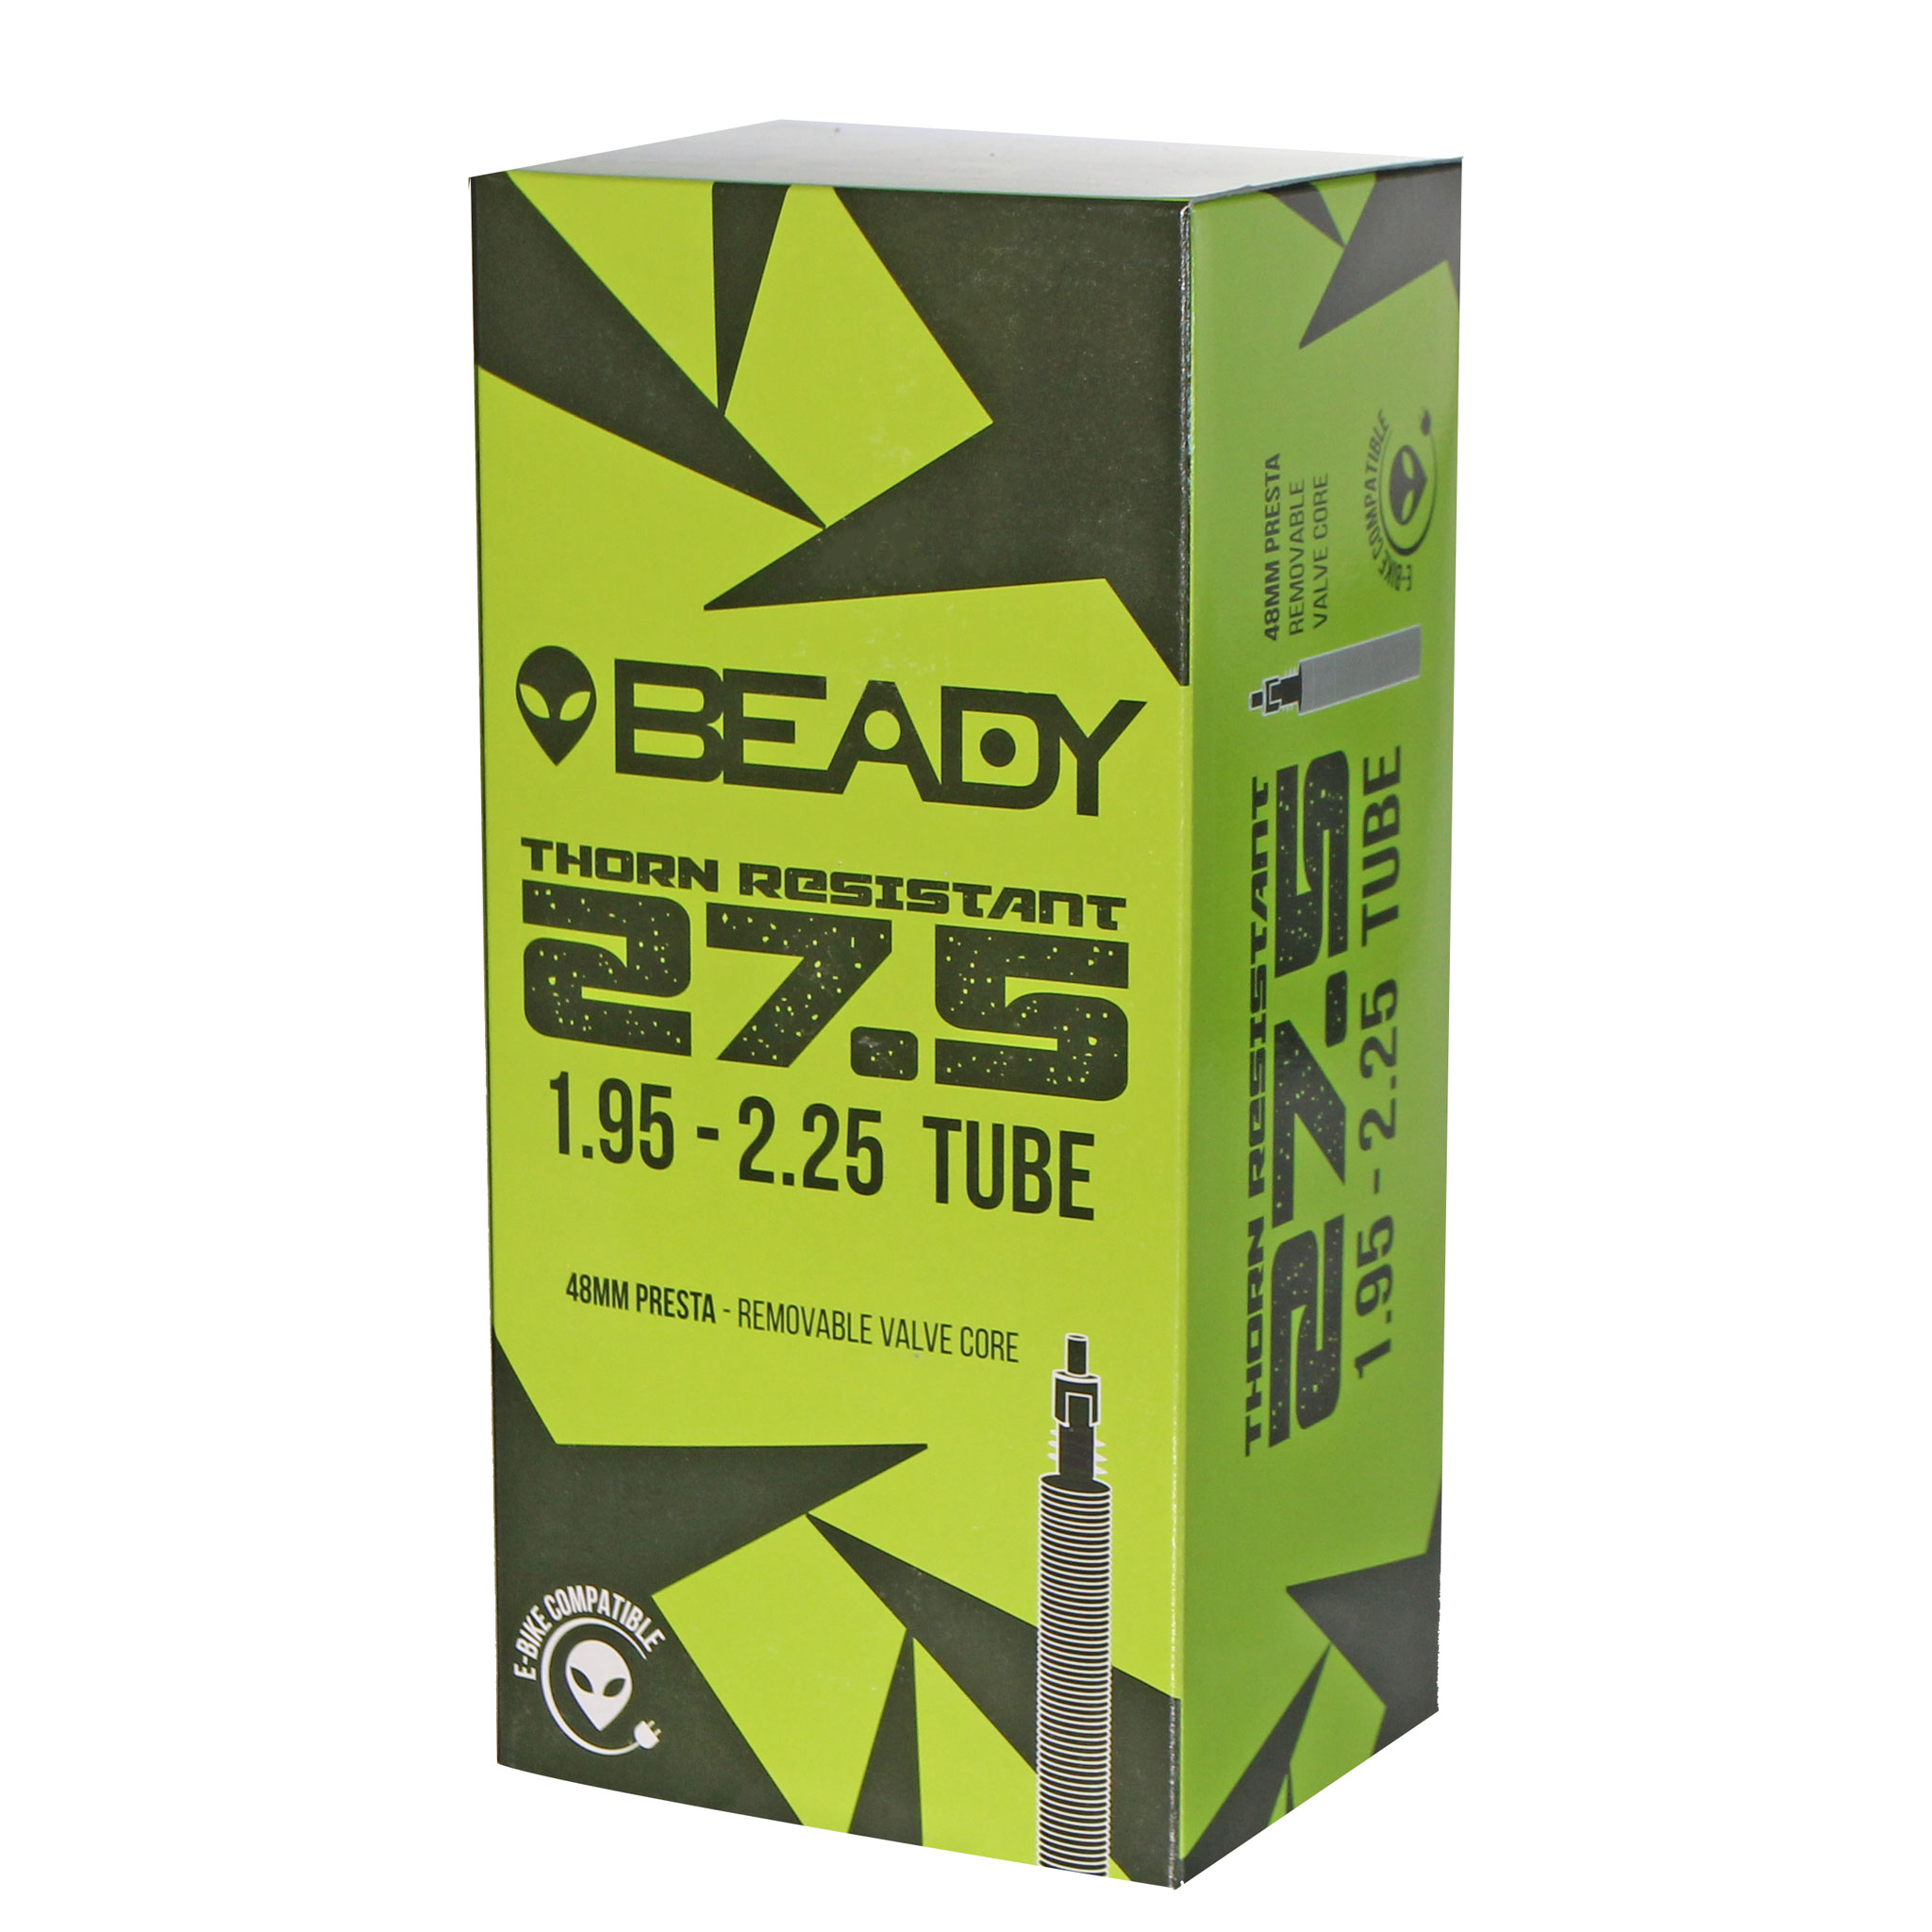 Beady Thorn Resistant Tube, 27.5x1.95-2.25" PV 48mm